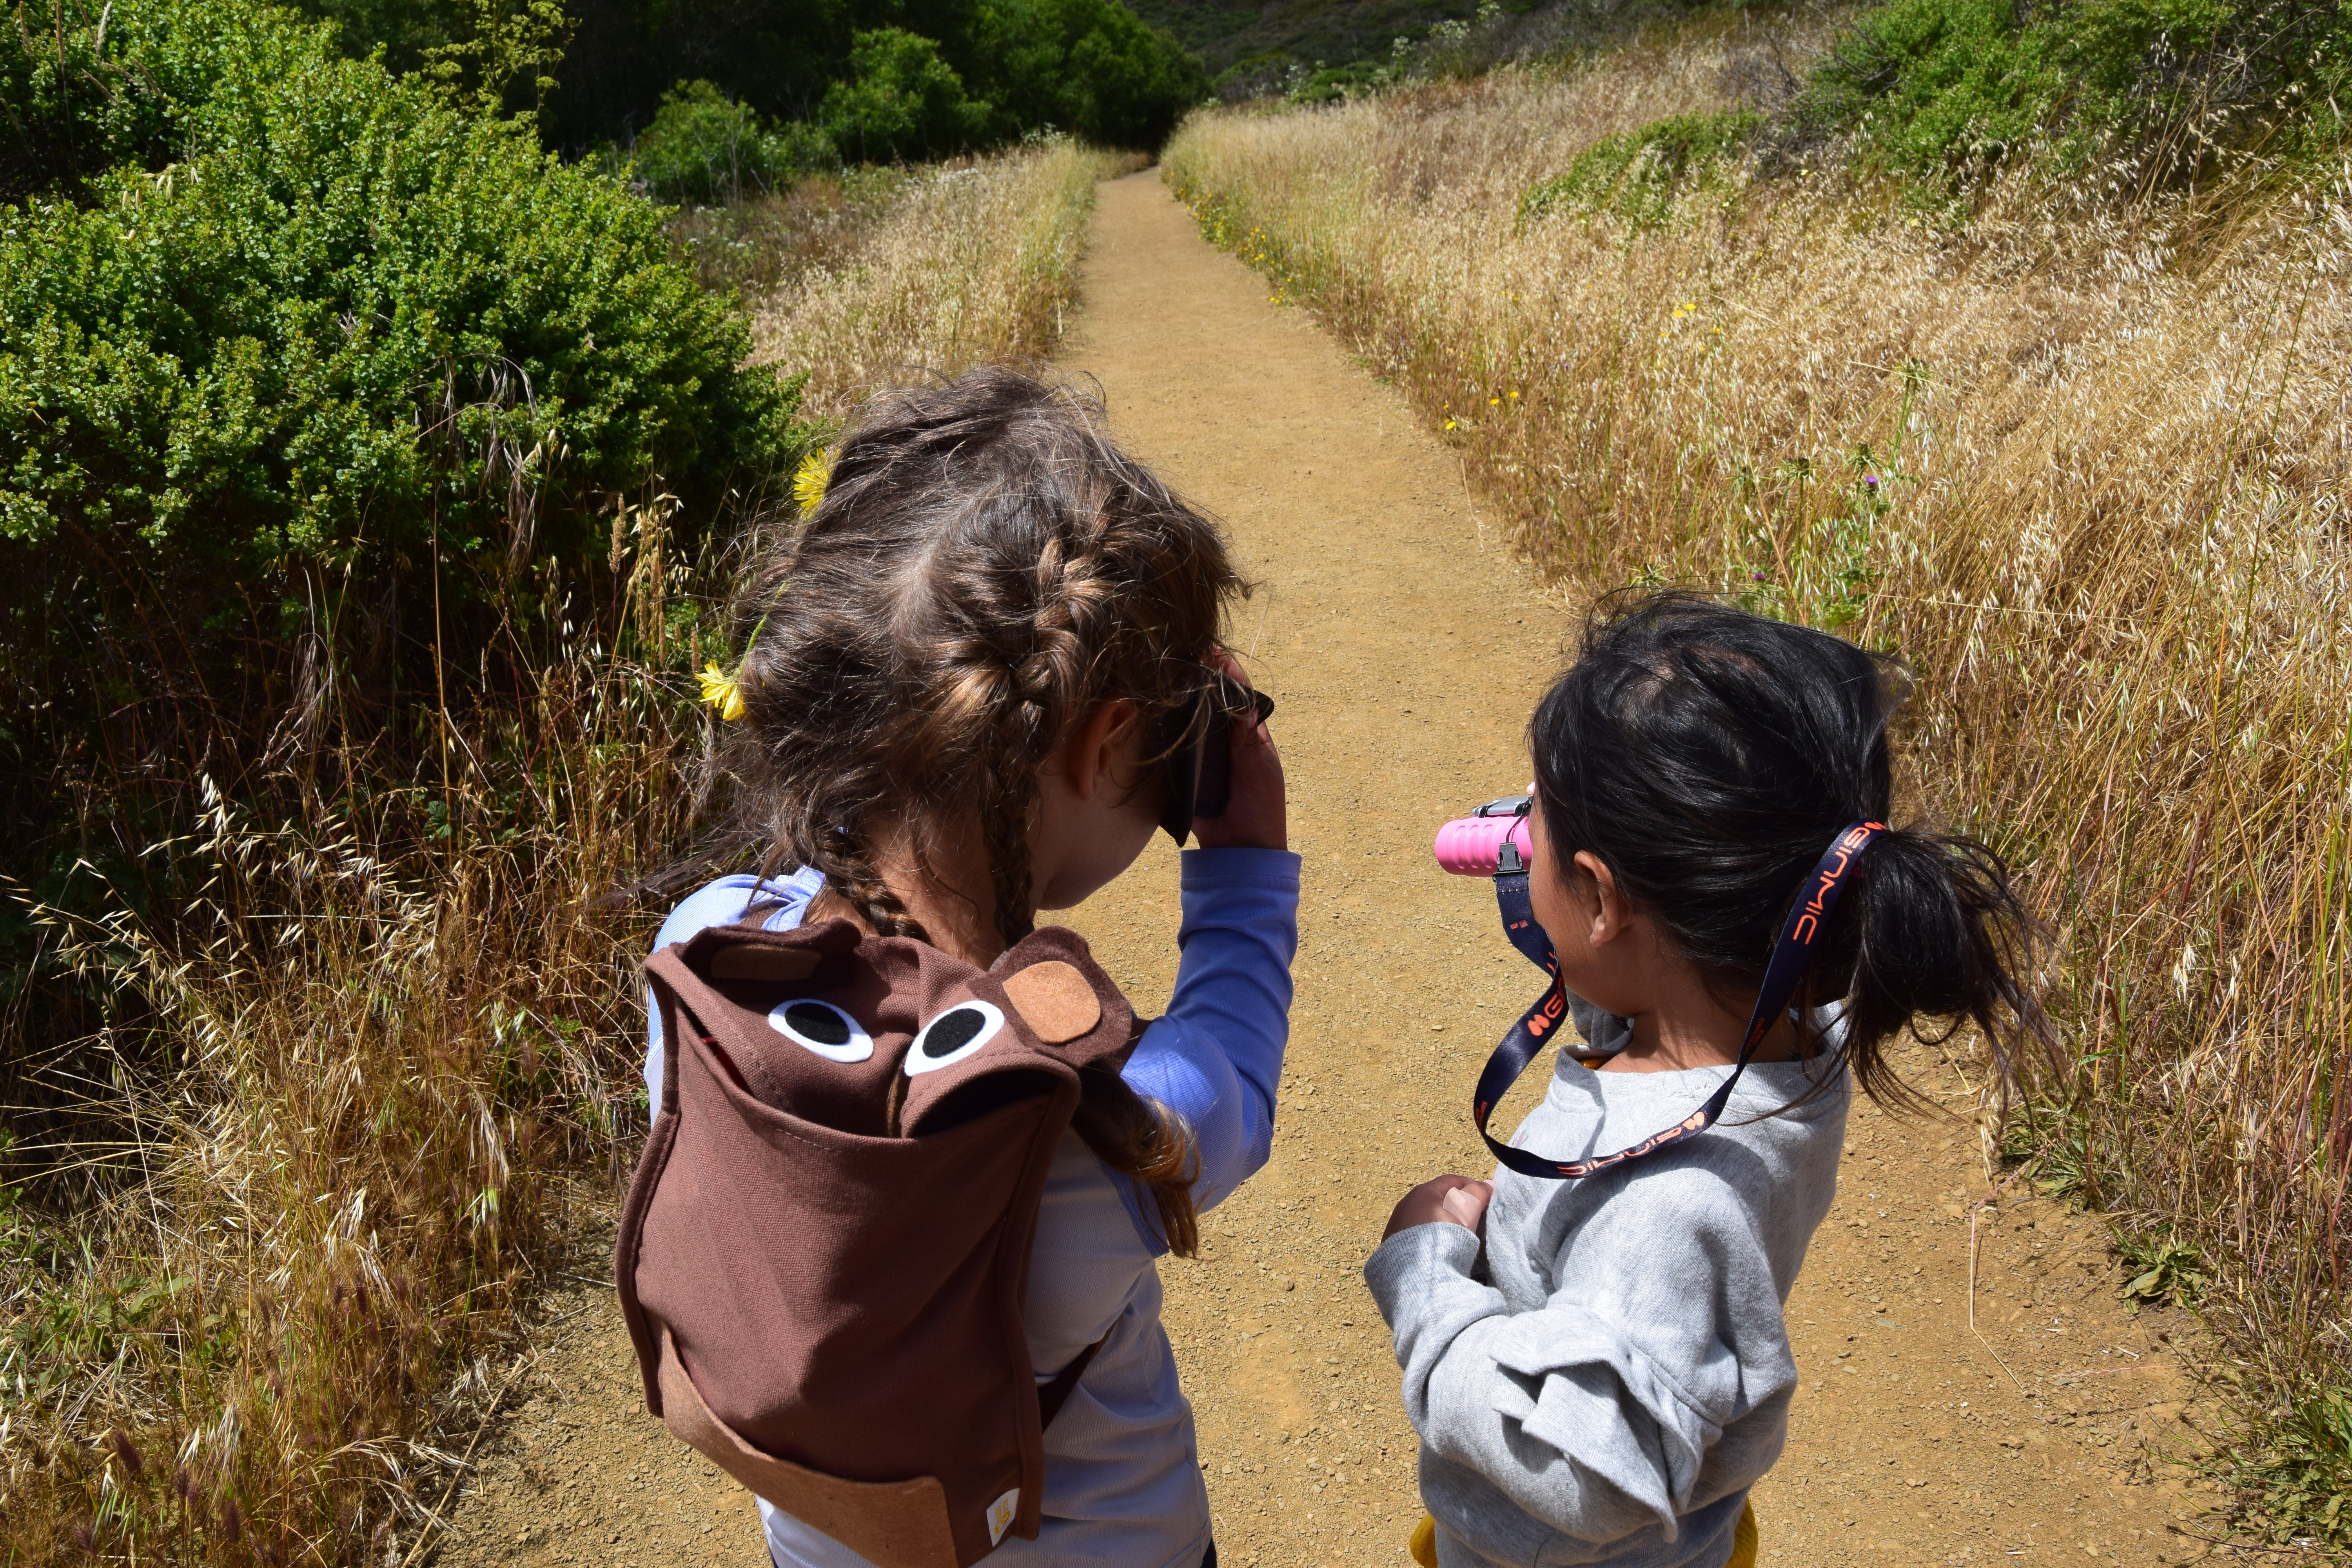 Two children looking through binoculars on the Tennessee Valley Trail while hiking